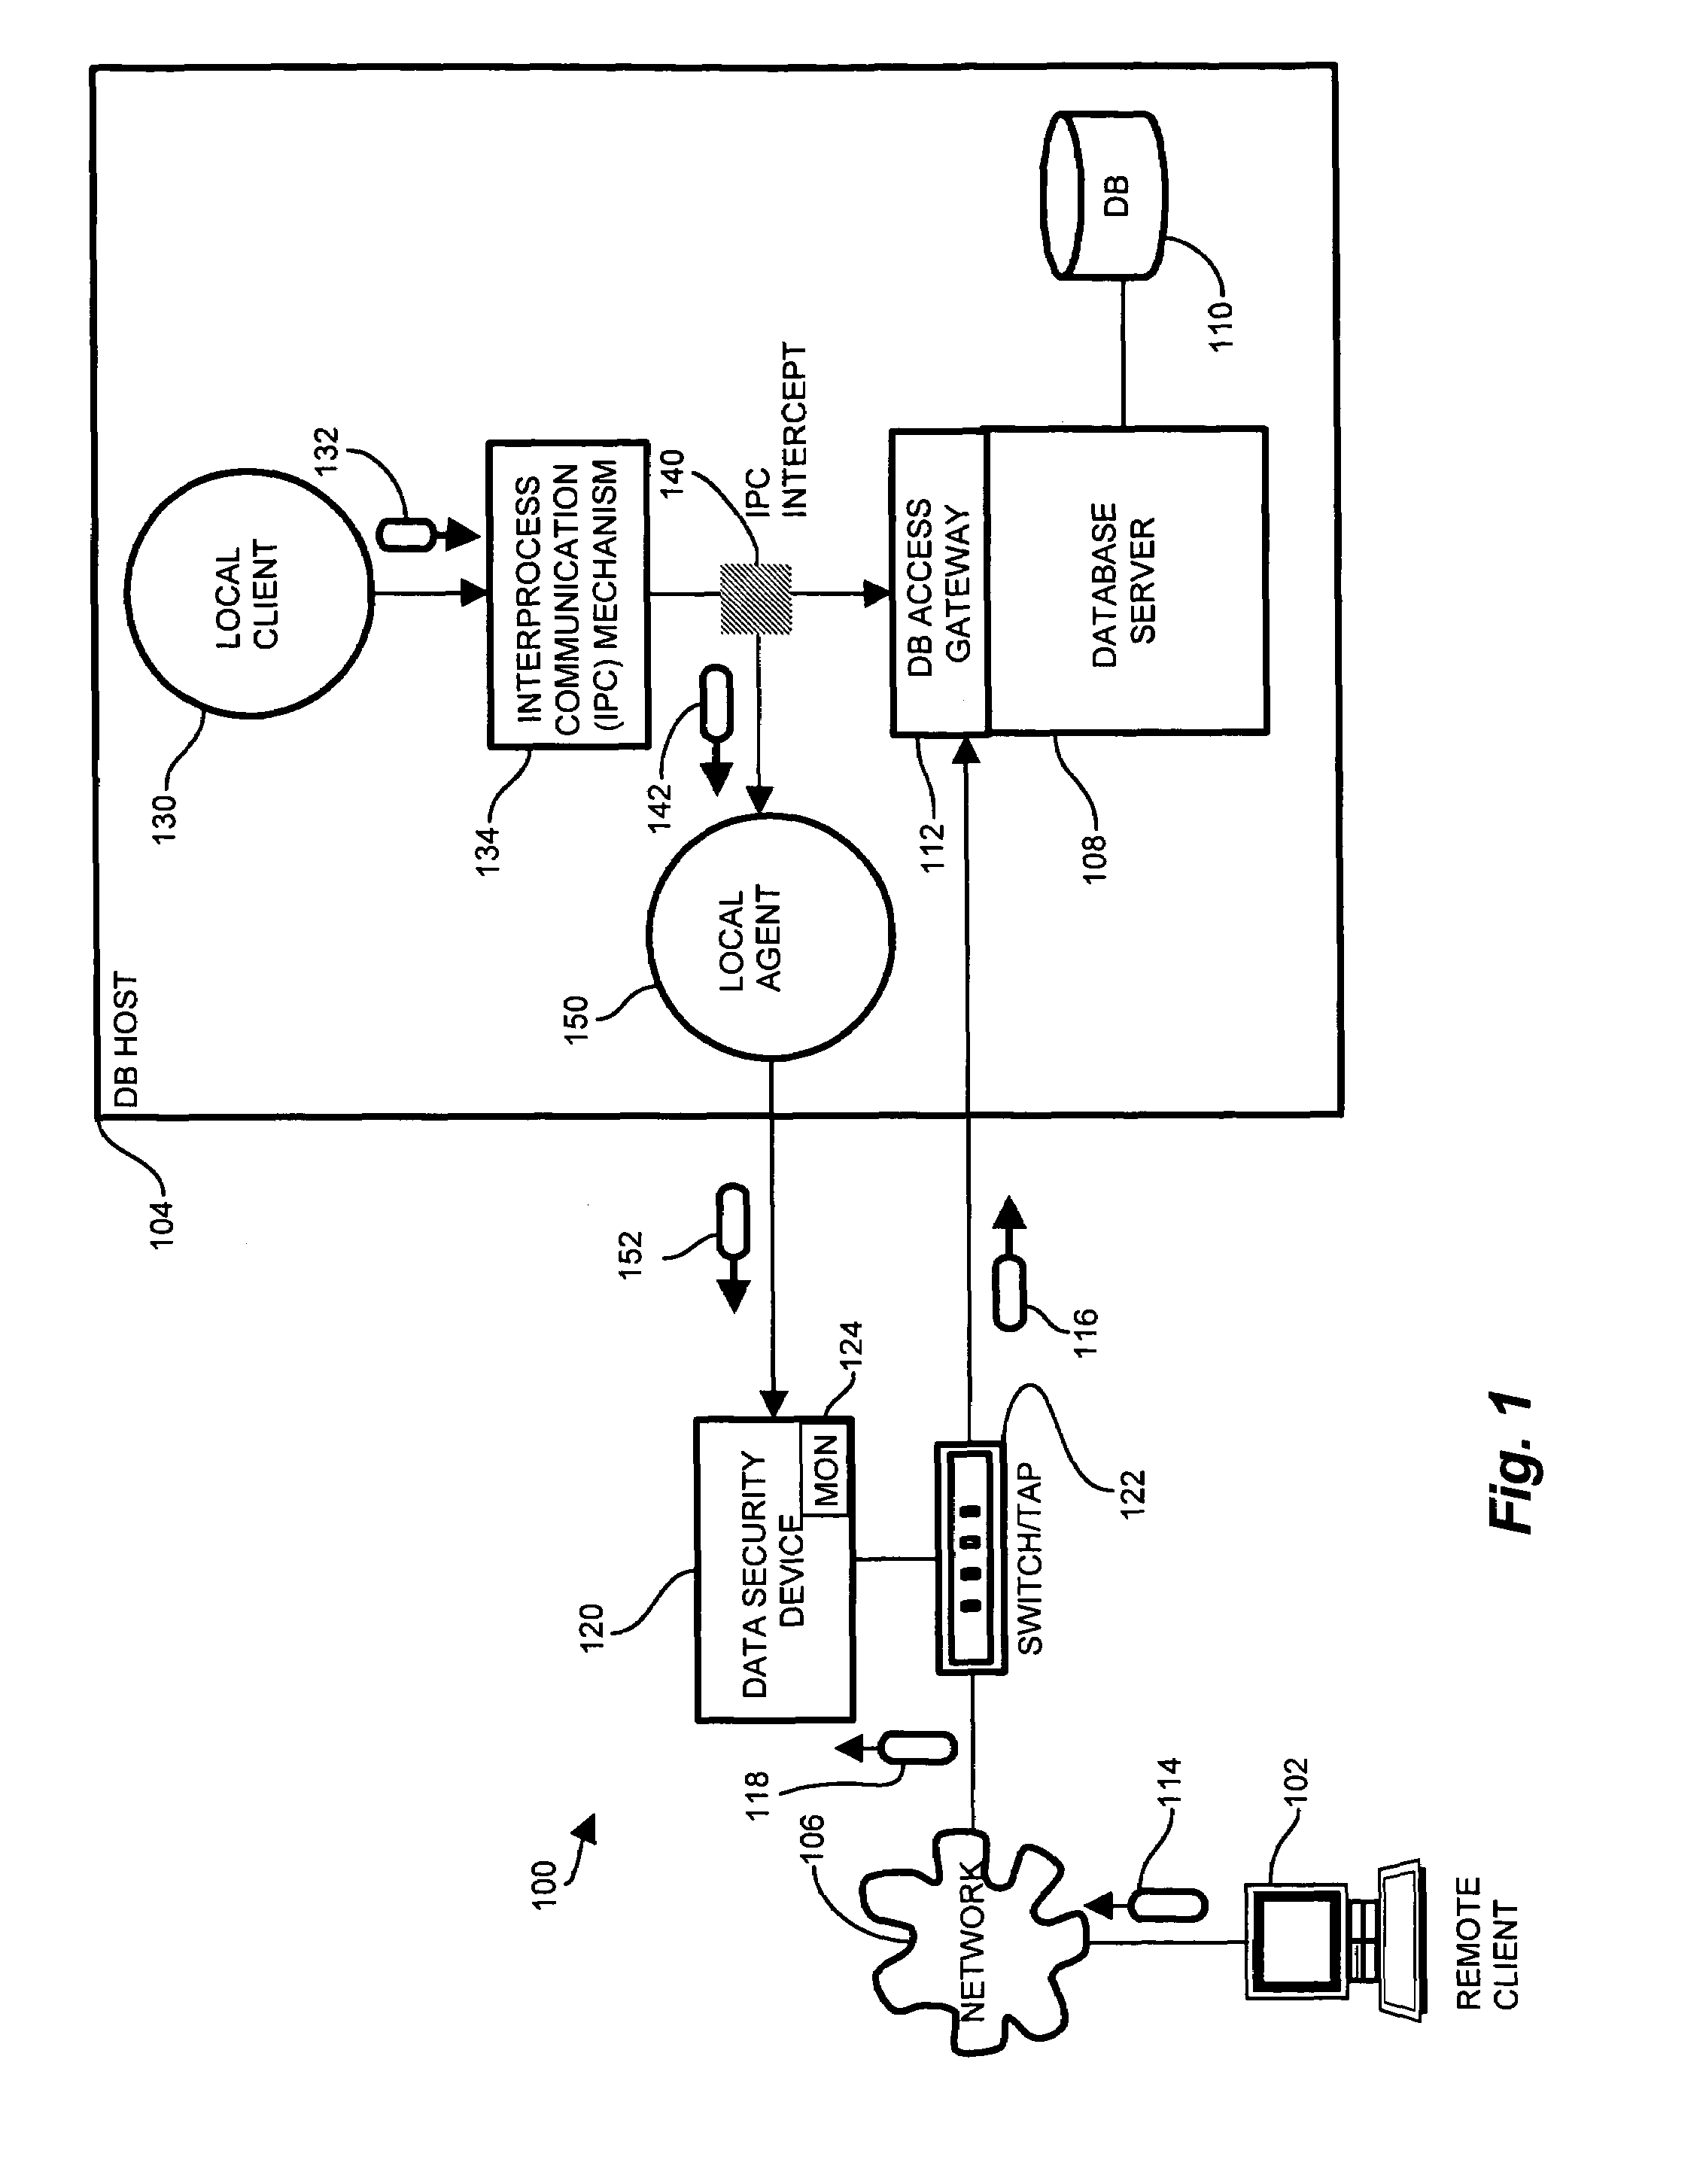 System and methods for tracking local database access